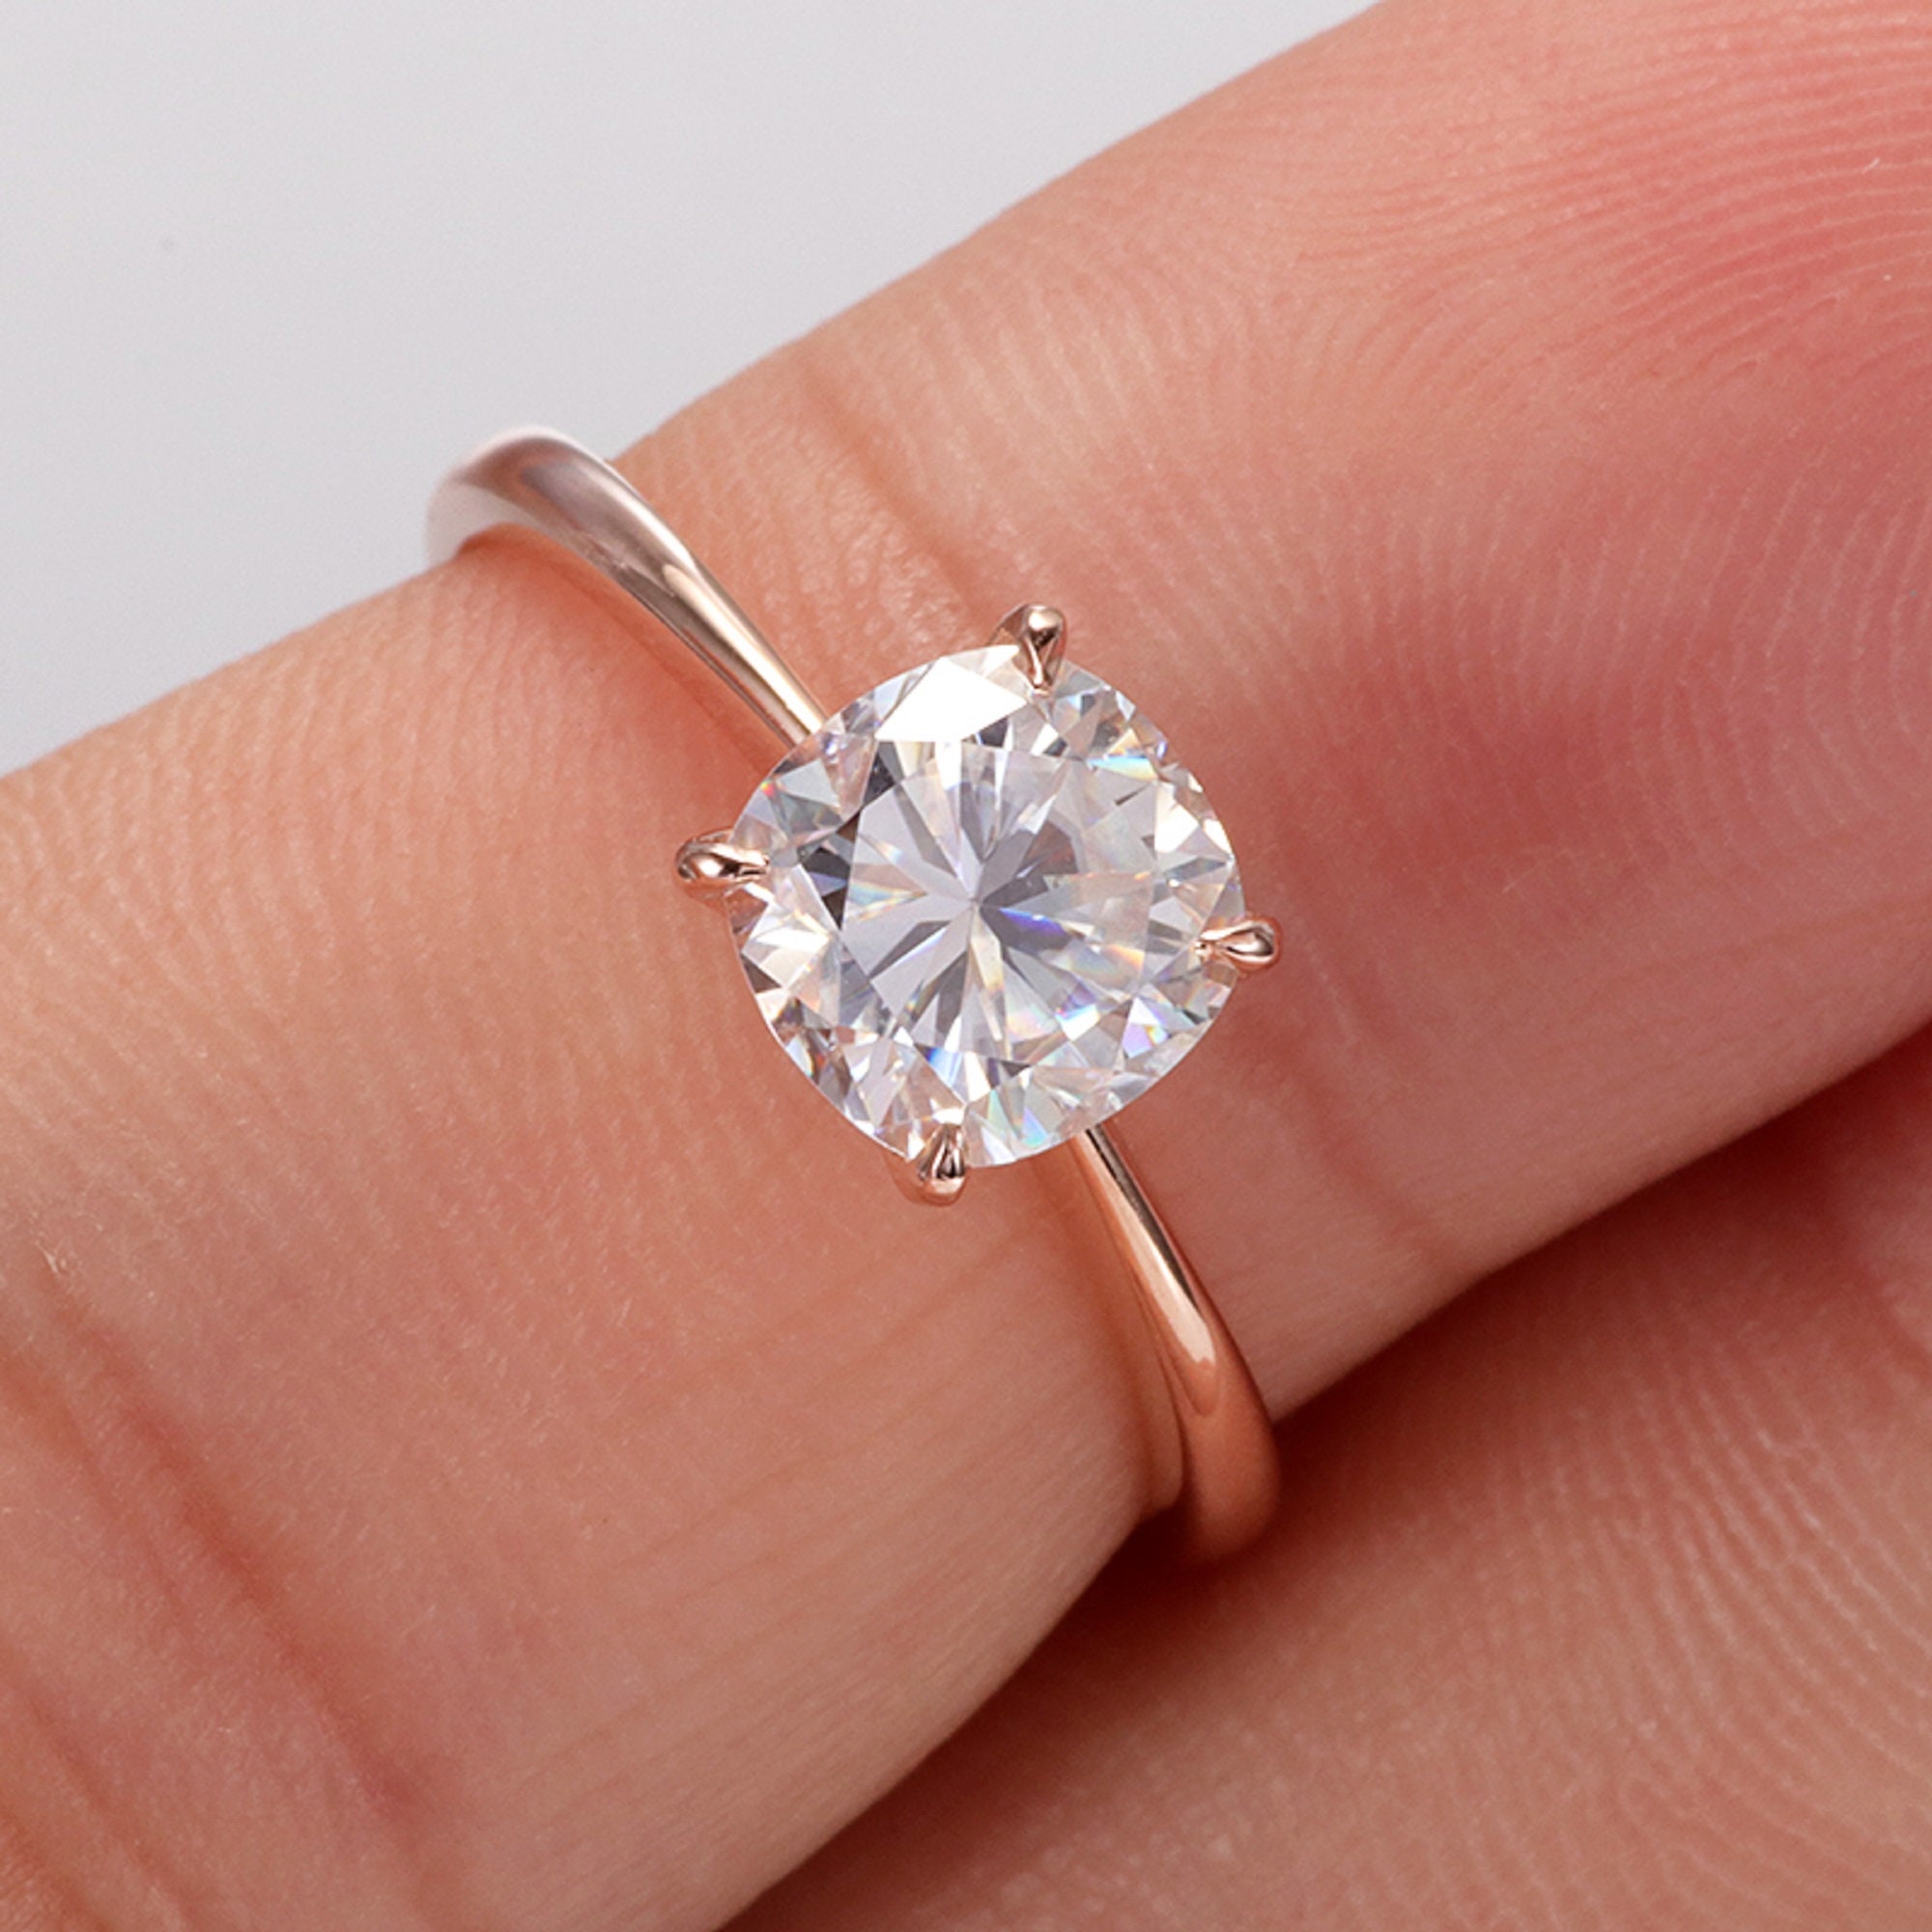 Details about   1.50 Ct Near Colorless Cushion Moissanite Bypass Engagement Ring 14K White Gold 